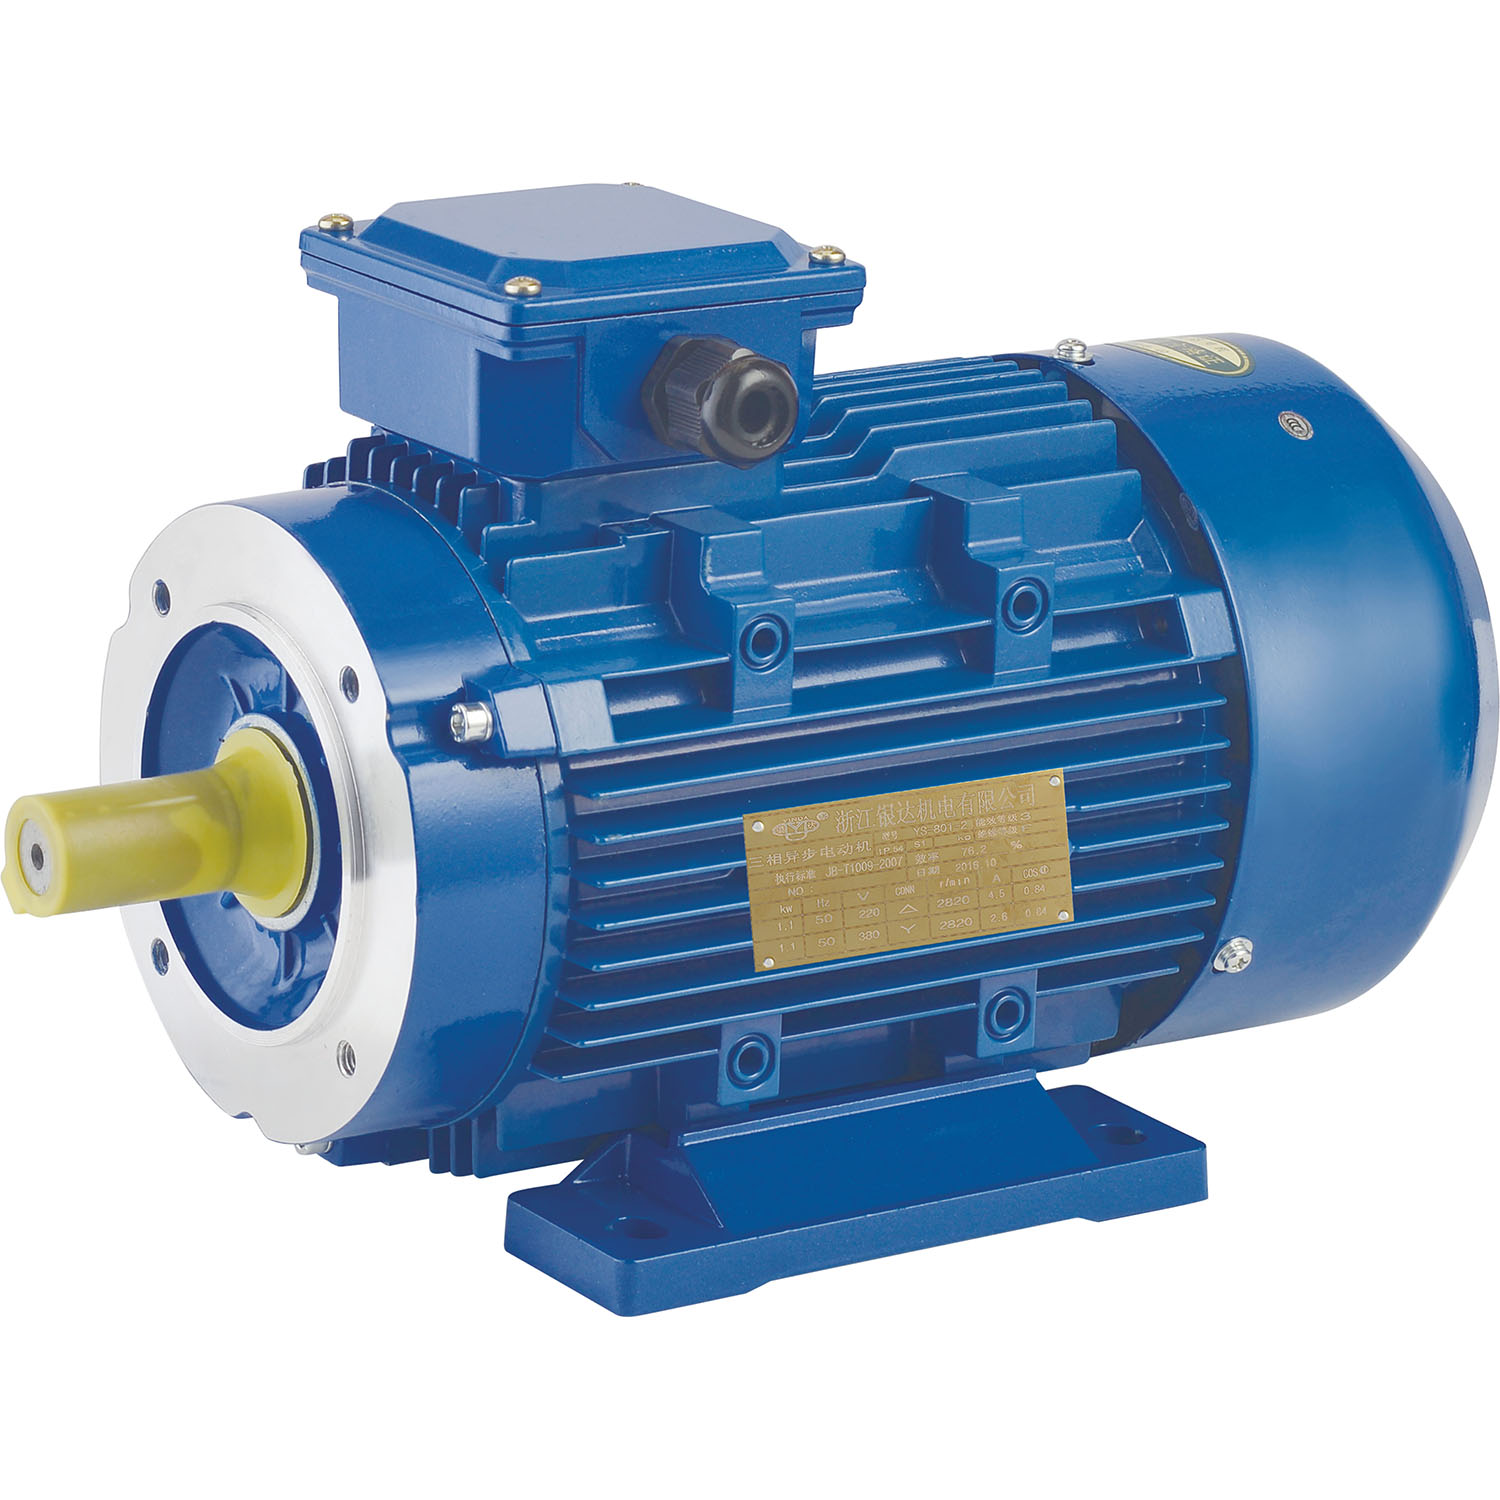 YX3-112M-8 1.5KW 2.0HP aluminum cylinder series high efficiency three-phase asynchronous motor